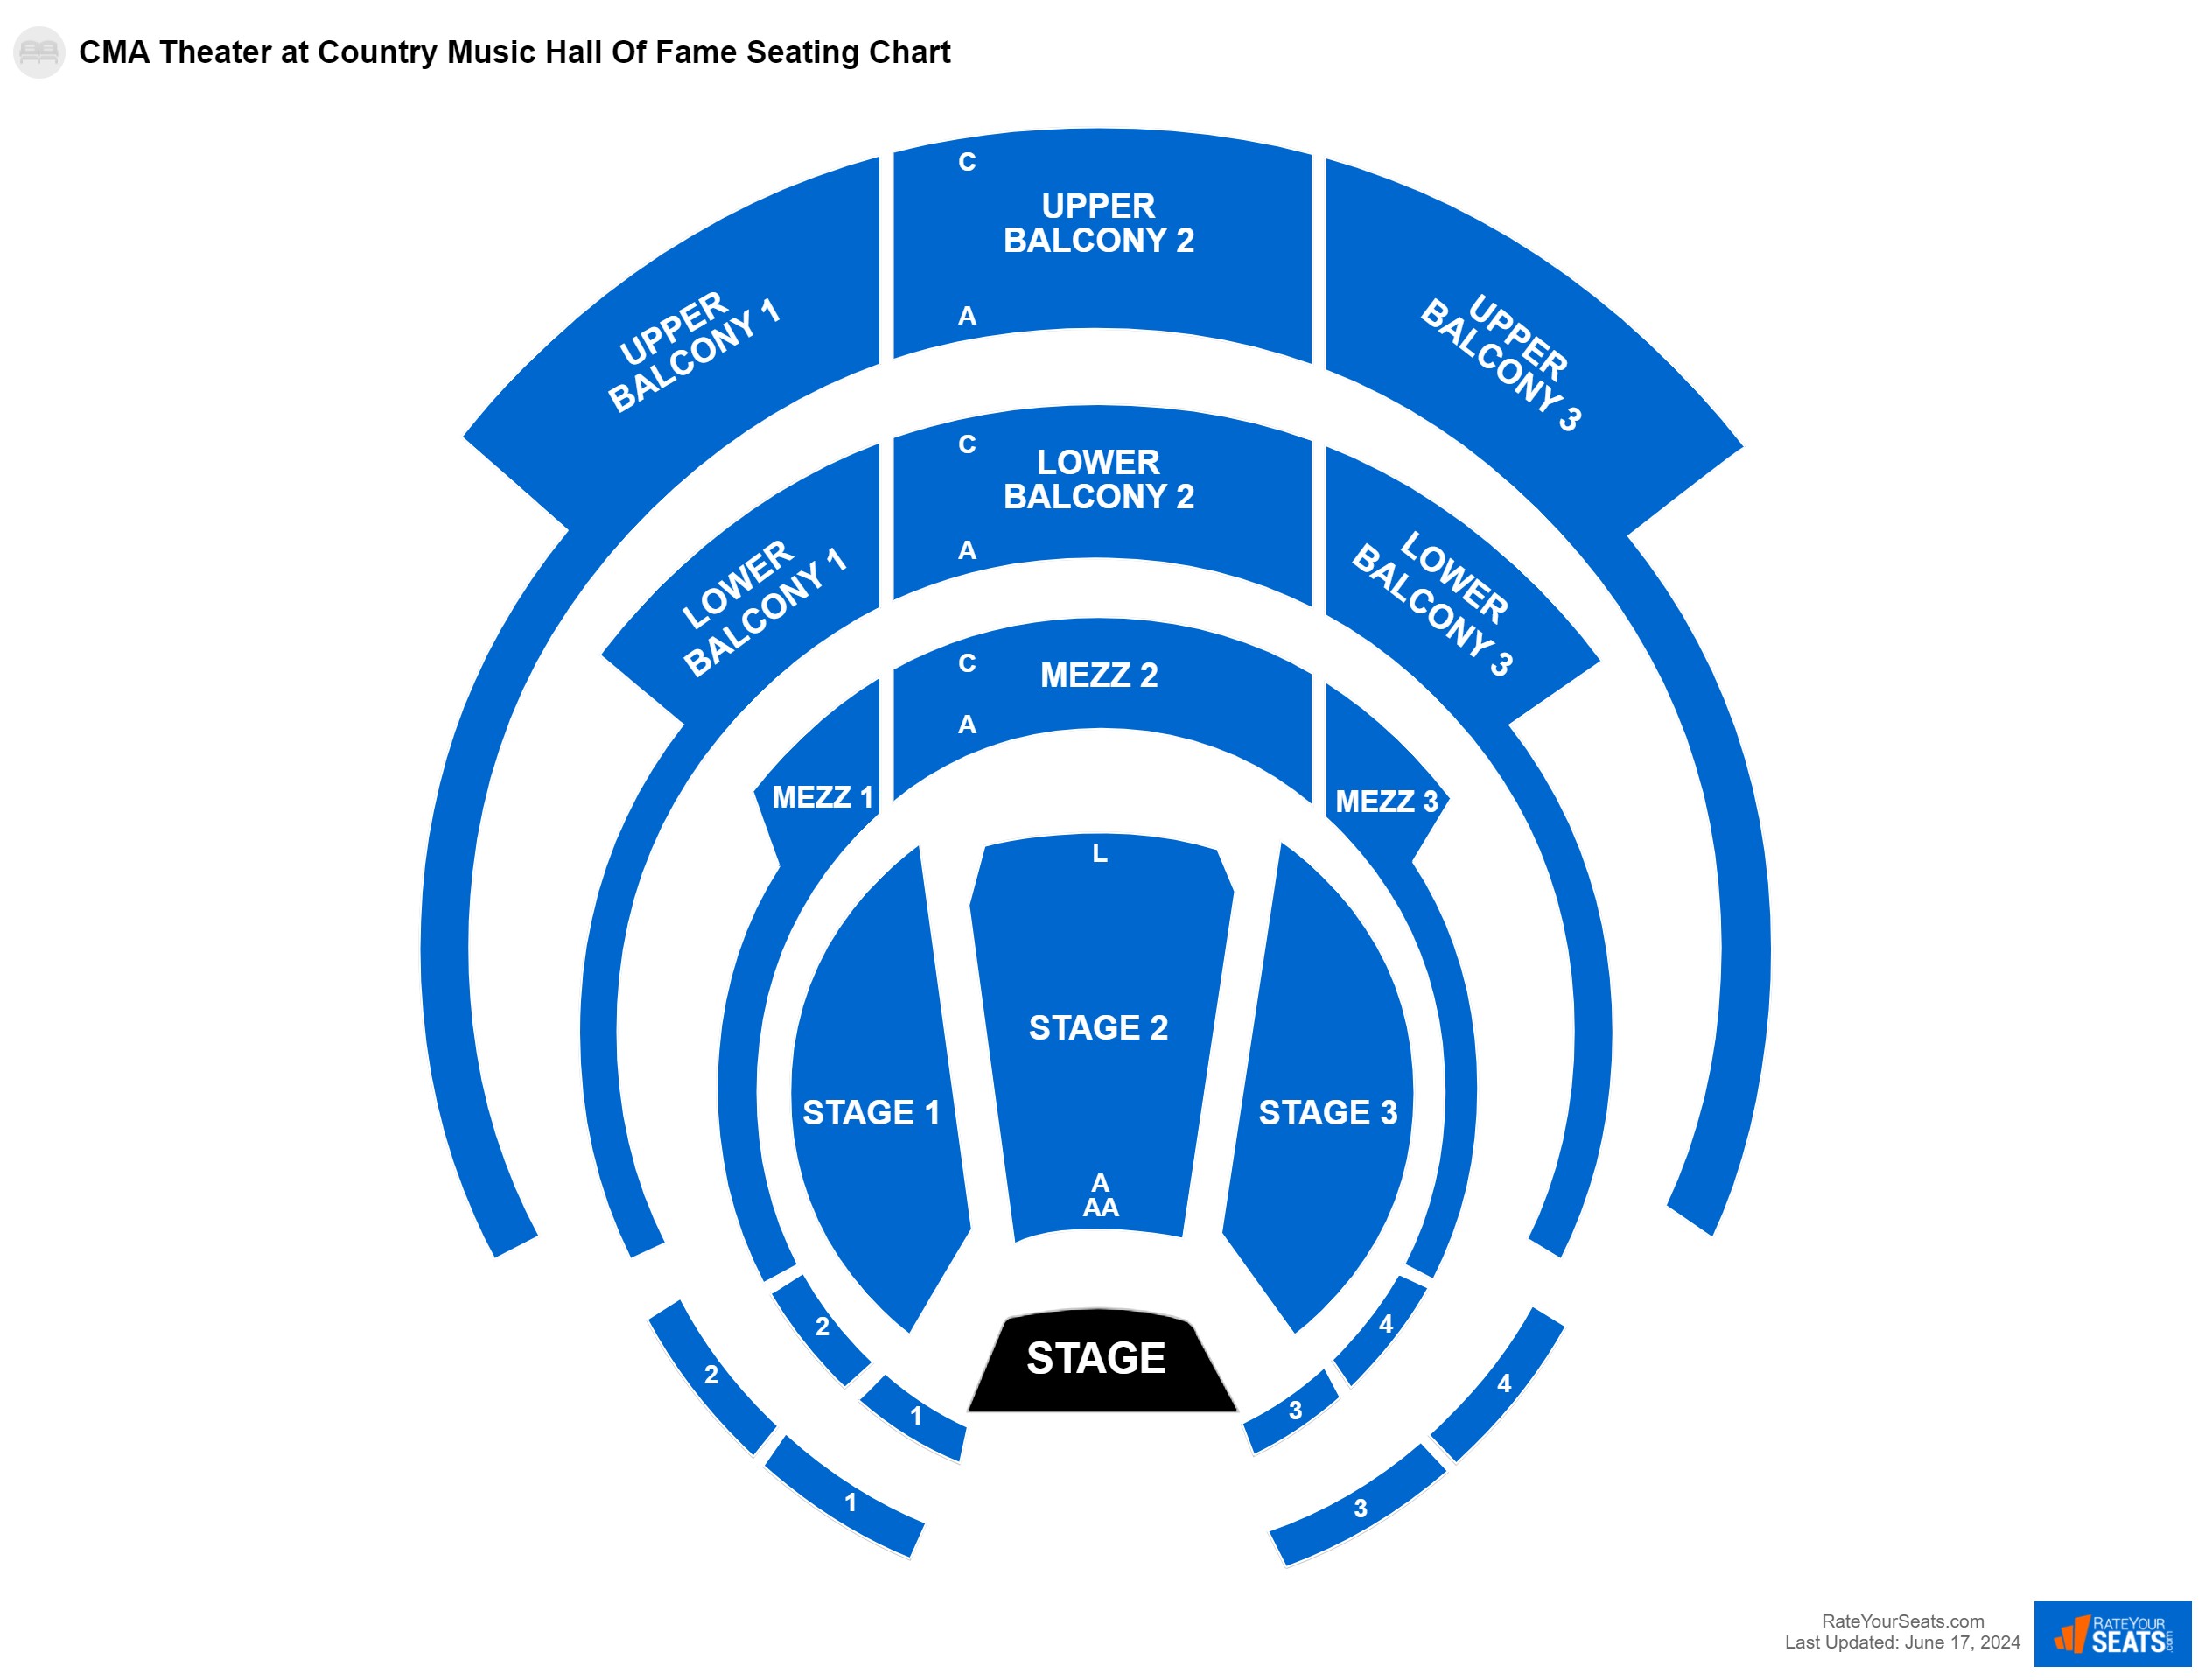 Concert seating chart at CMA Theater at Country Music Hall Of Fame